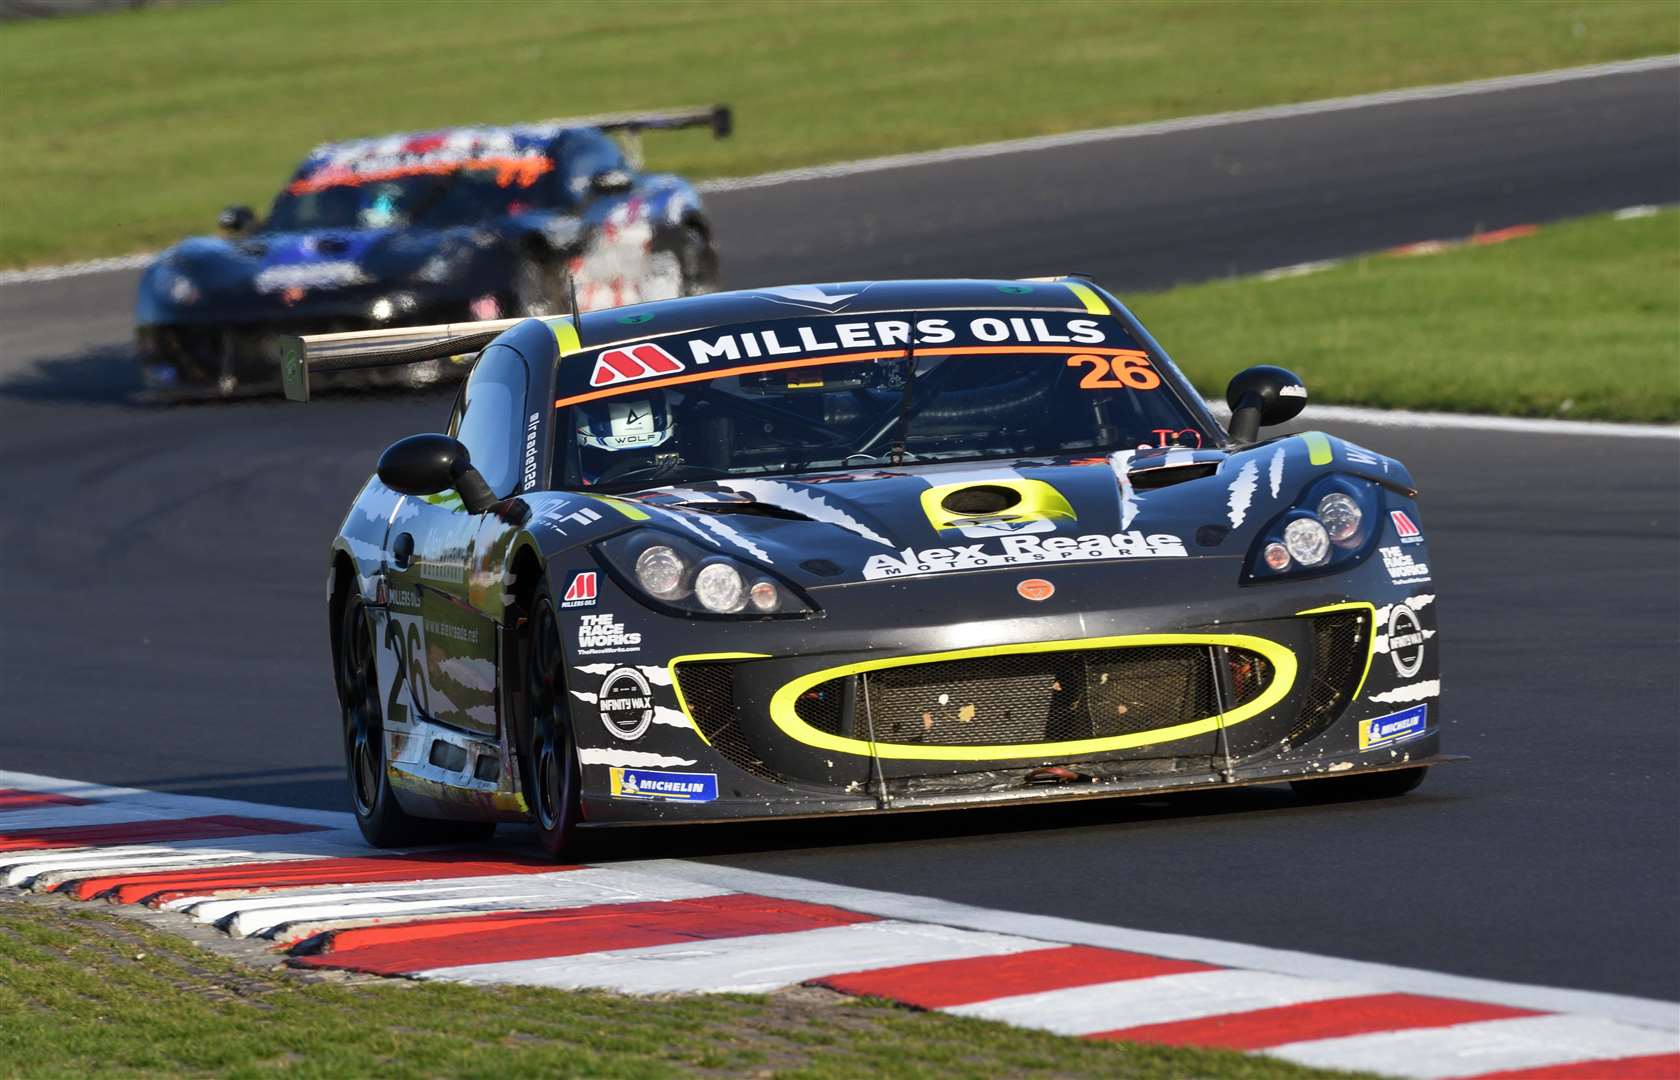 Wolf Motorsport's Luke Reade, from Dartford, won the G55 Pro class title in the Ginetta GT4 SuperCup. He scored three third-place finishes over the weekend, doing enough to beat Blake Angliss by three points